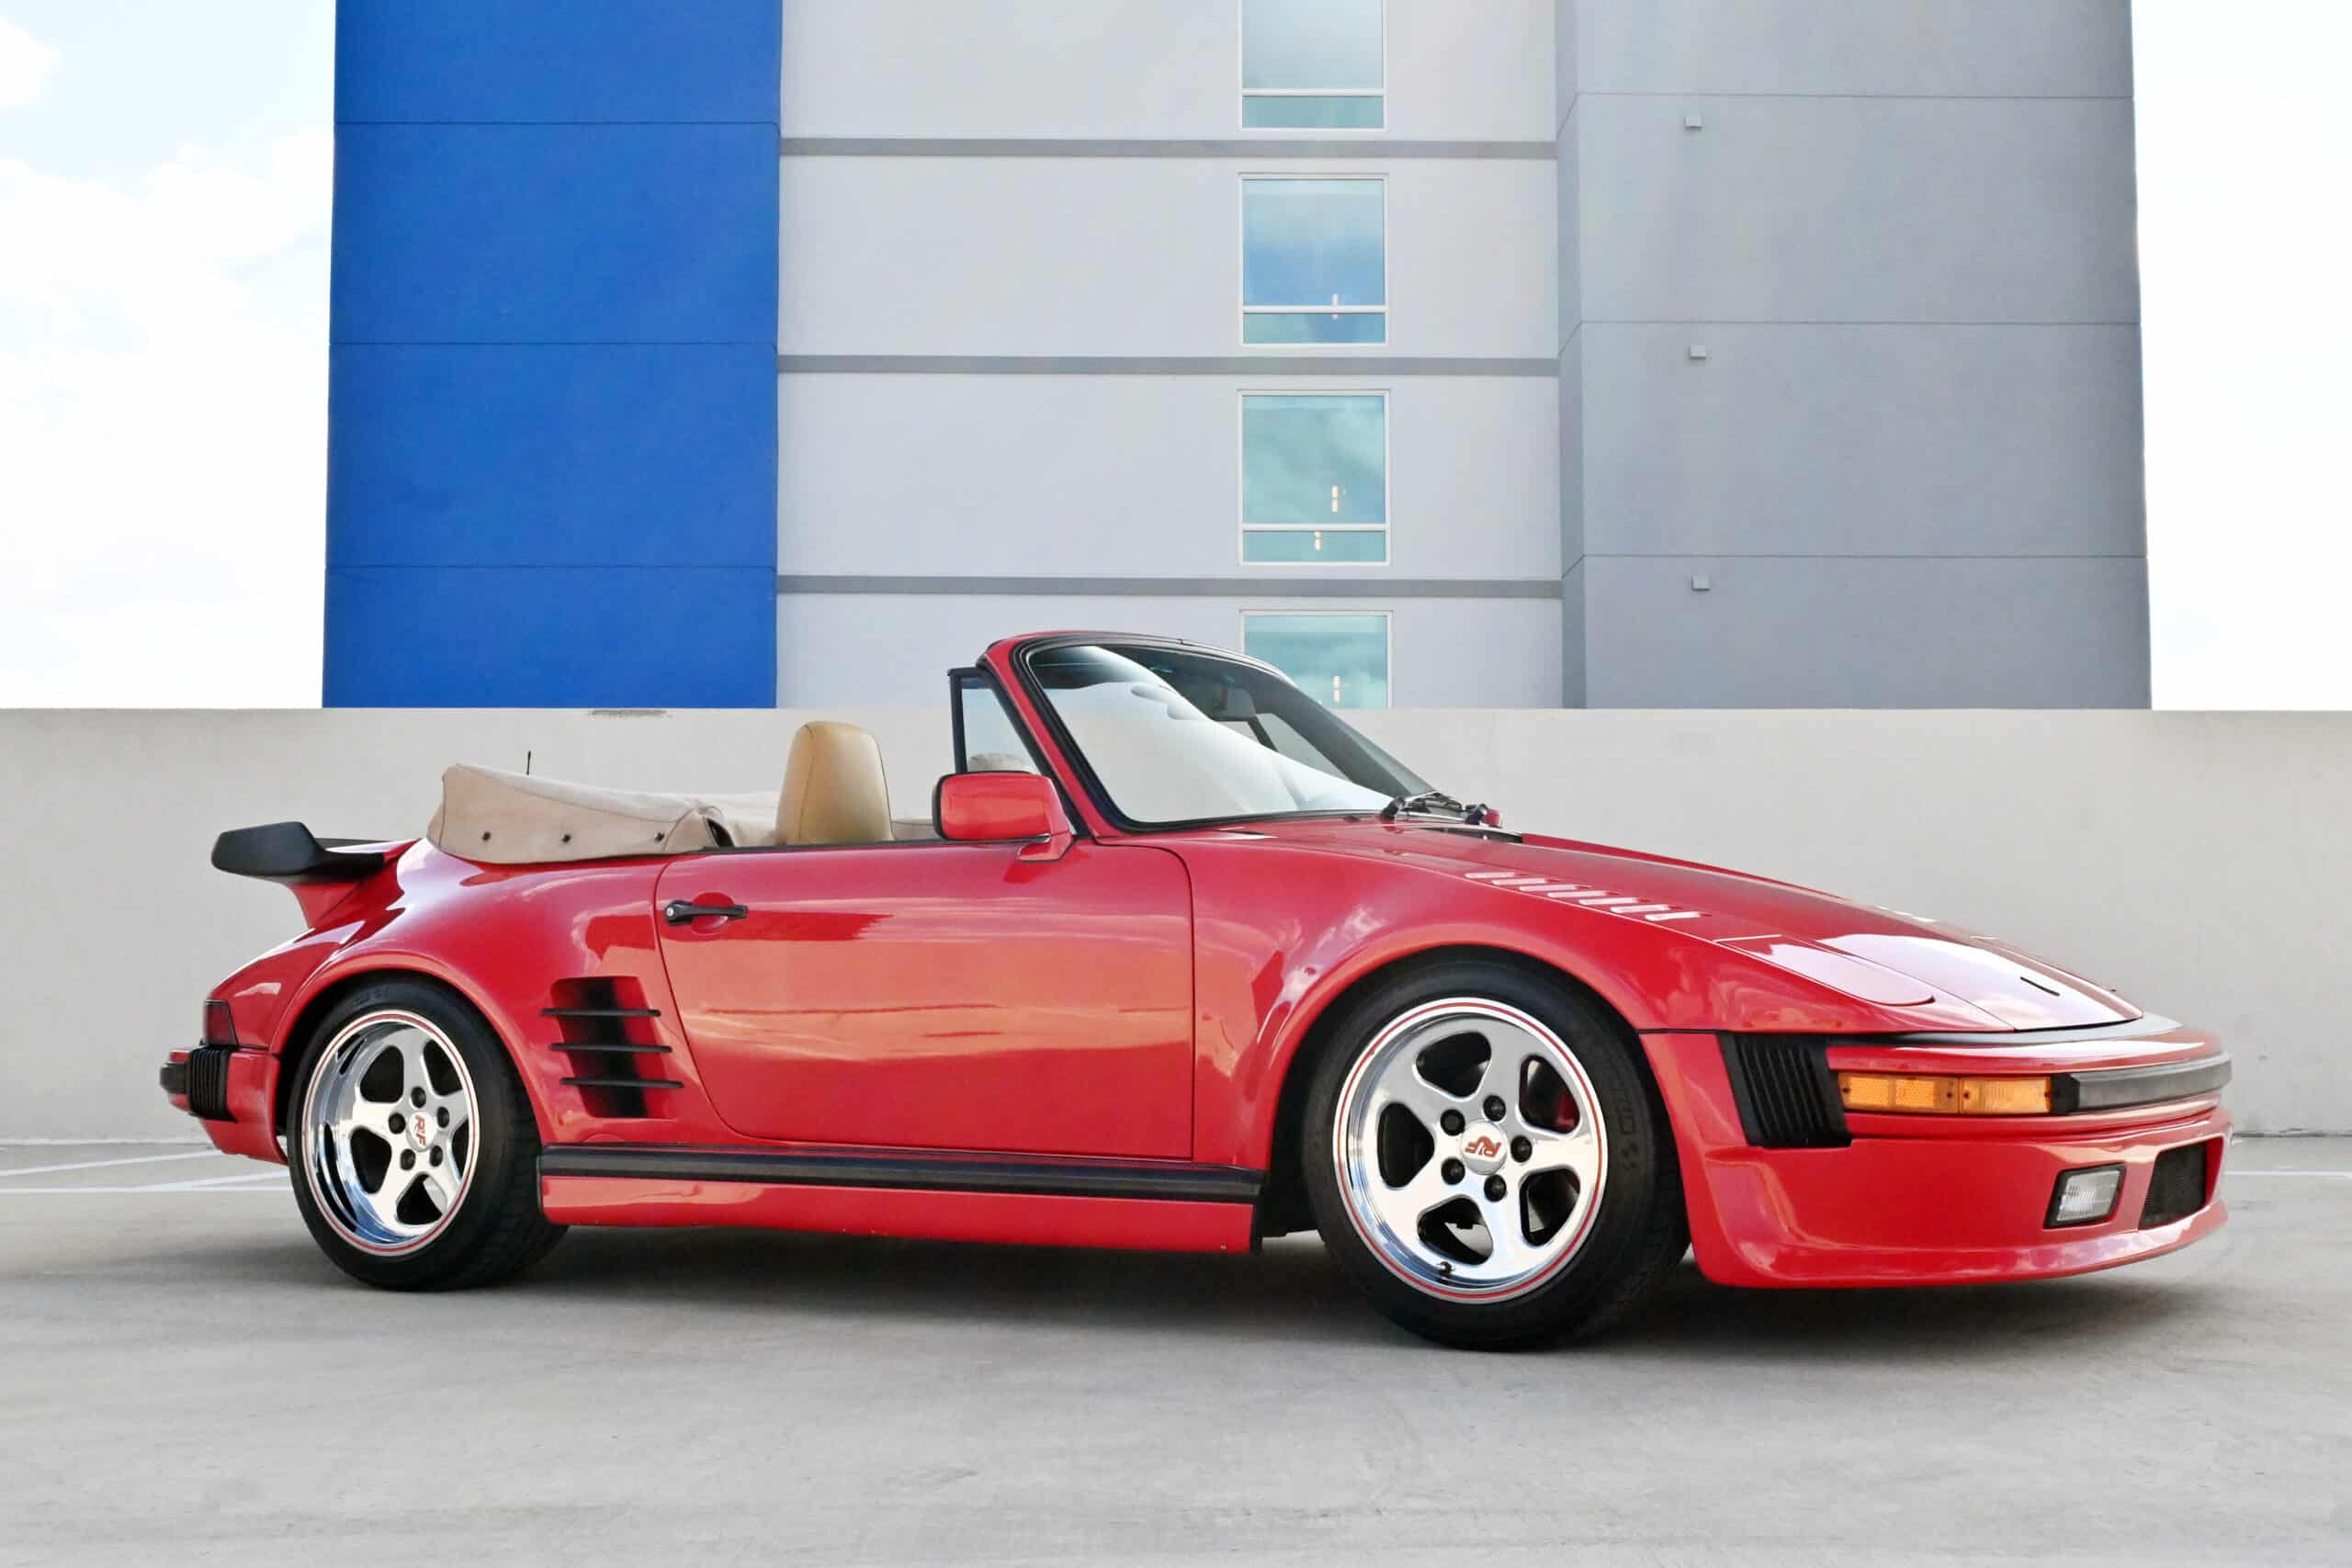 1989 Carrera Slant Nose / 11K Actual and Documented Miles / Indy Car Driver owned / Meticulously maintained with Records / Steel Slant Nose / Ruf Speedline Wheels / Museum quality / Window Sticker / Original Bill of Sale